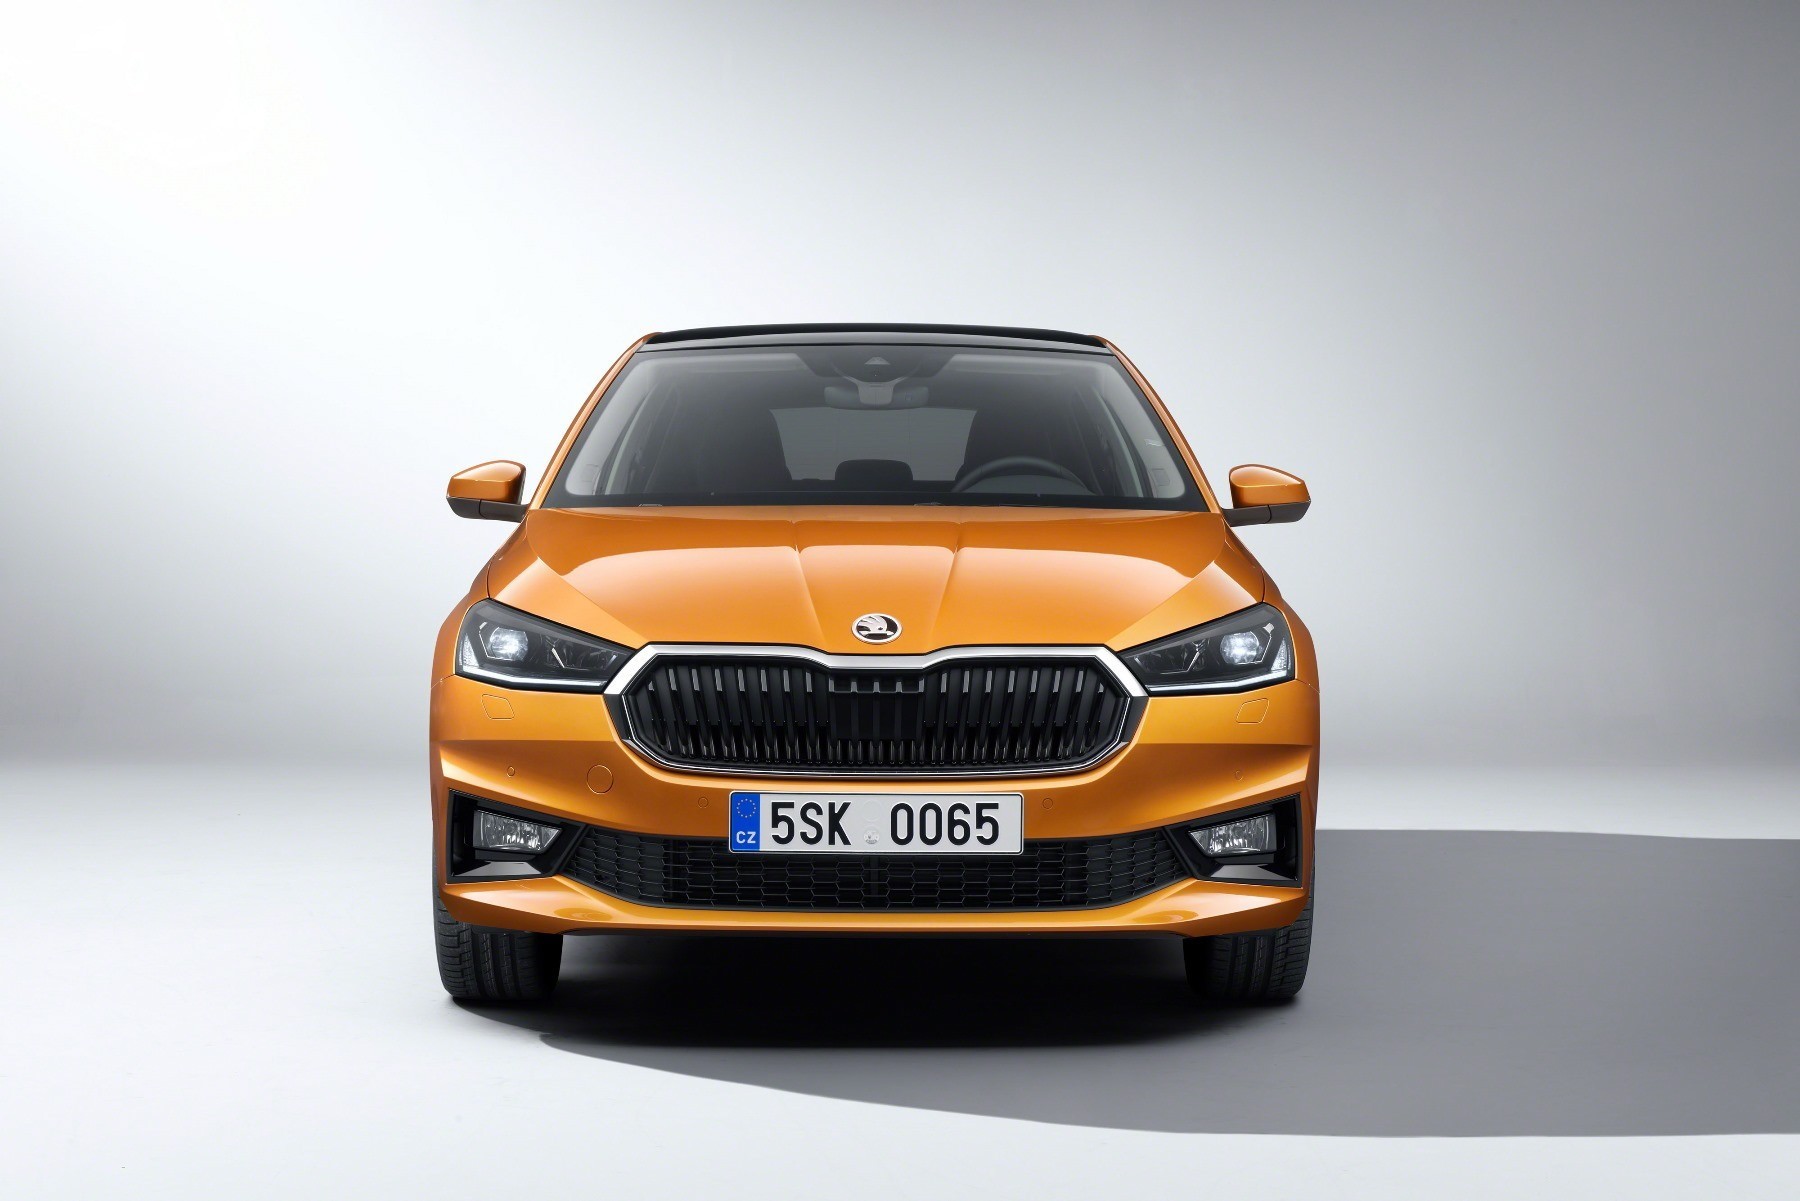 Skoda Roomster Reportedly Axed By Czech Automaker